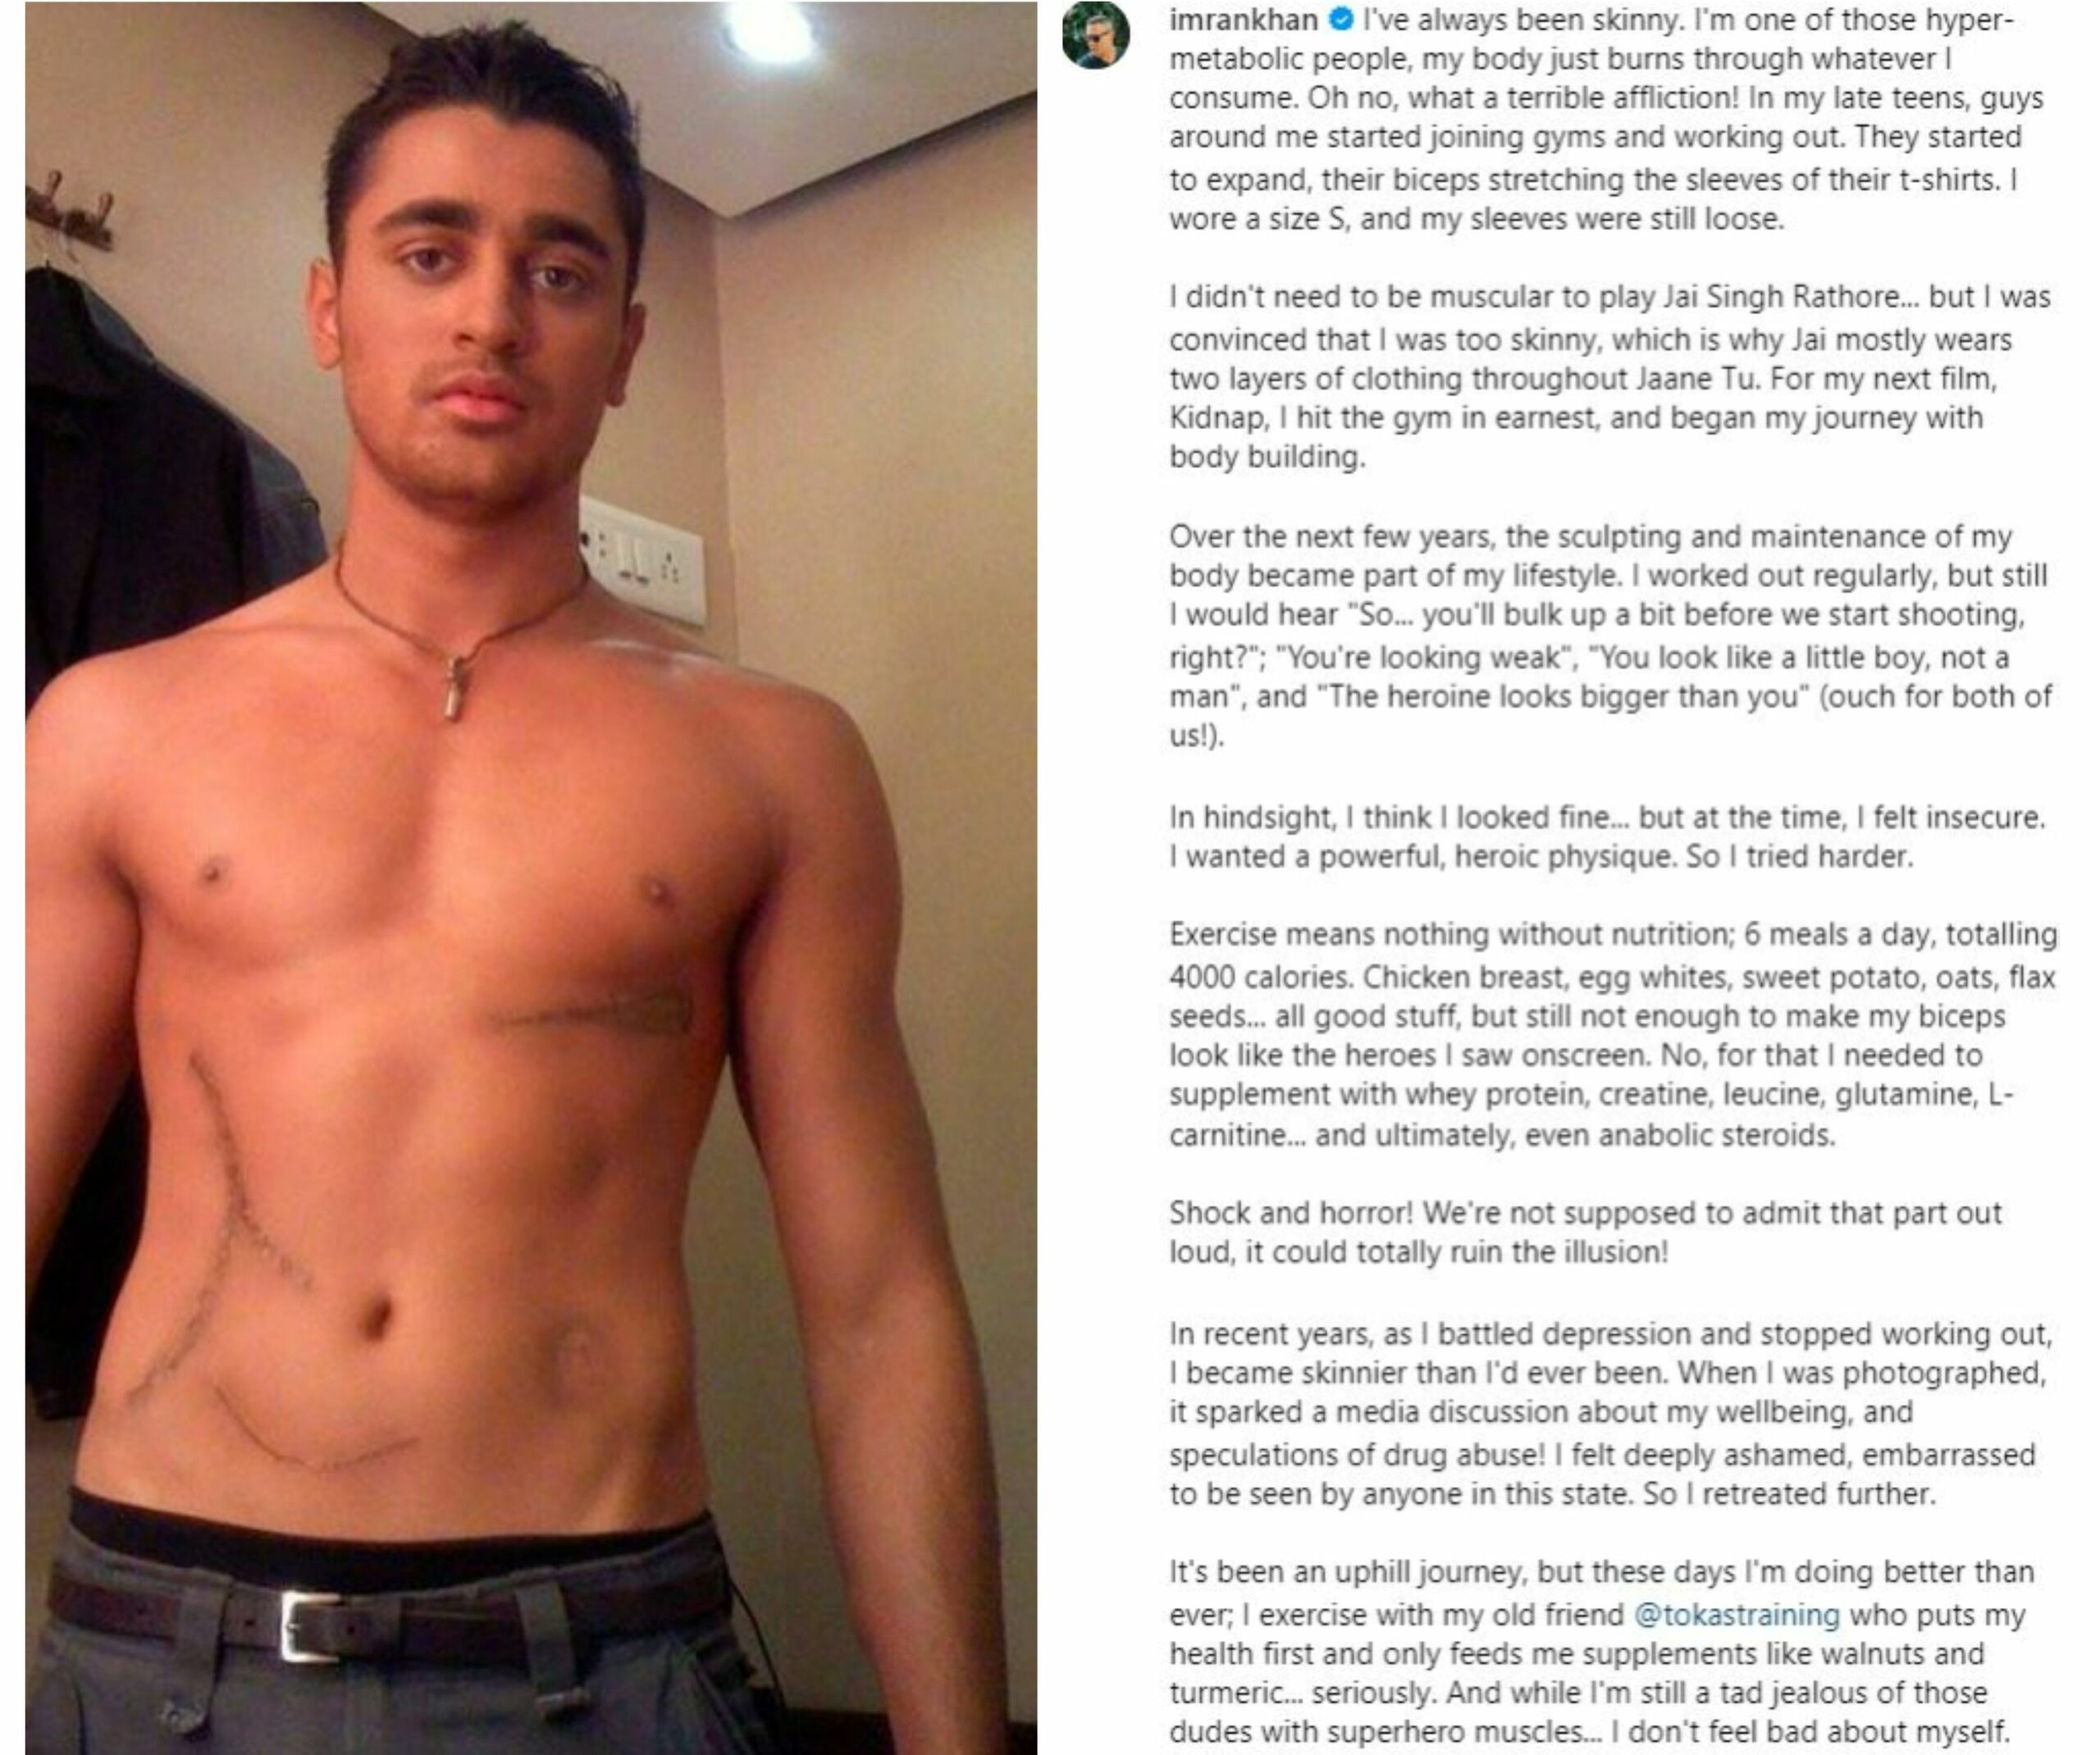 Imran Khan's post on Instagram about his struggle with depression and body image